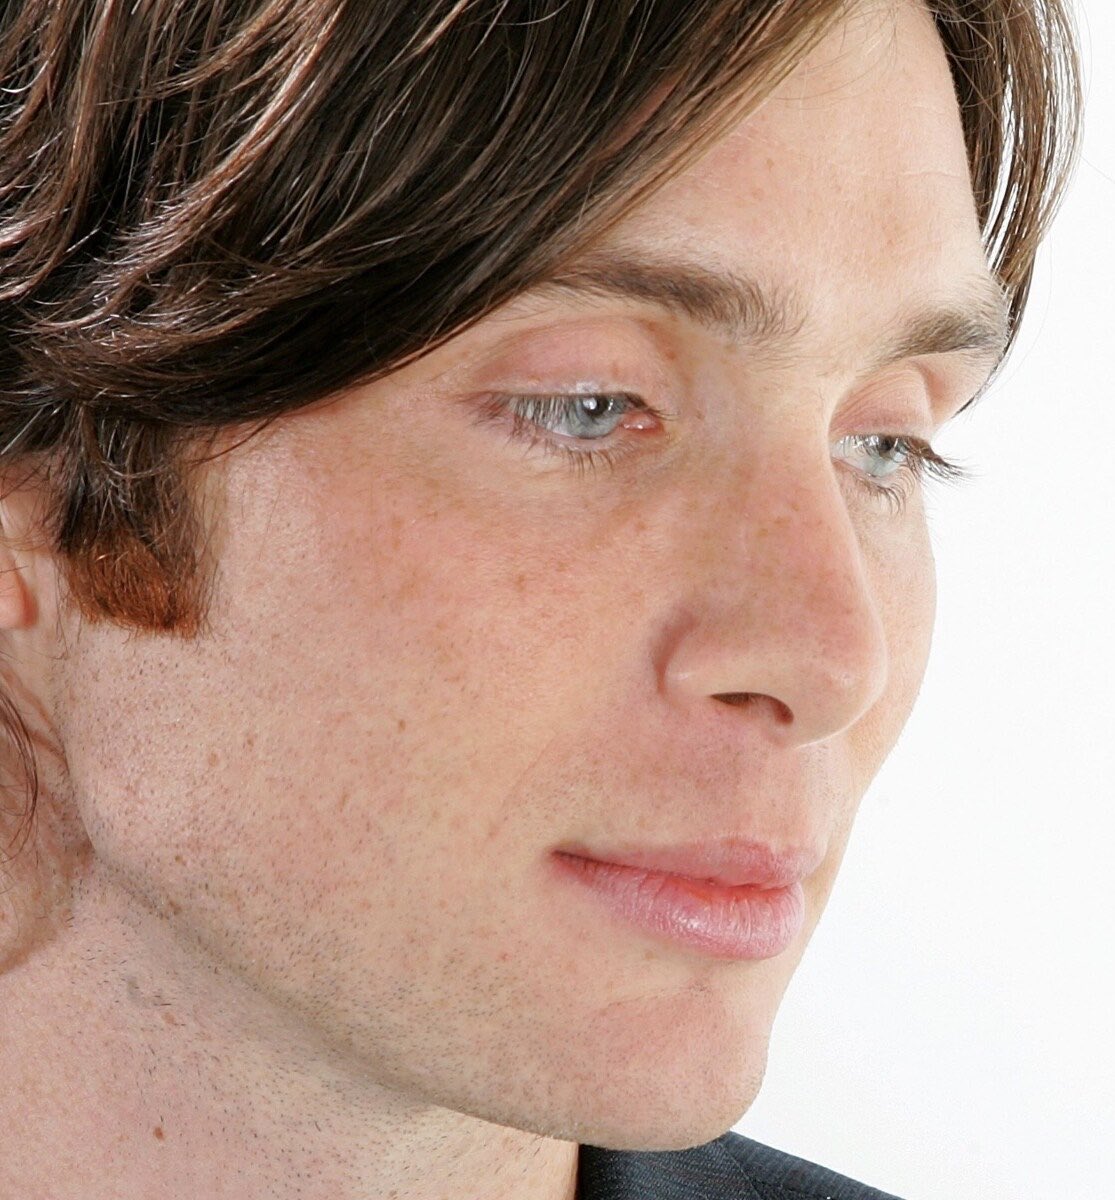 #CillianMurphy photographed by Carlo Allegri at the Toronto Film Festival in 2006. 
That’s how an angel looks like 🩵